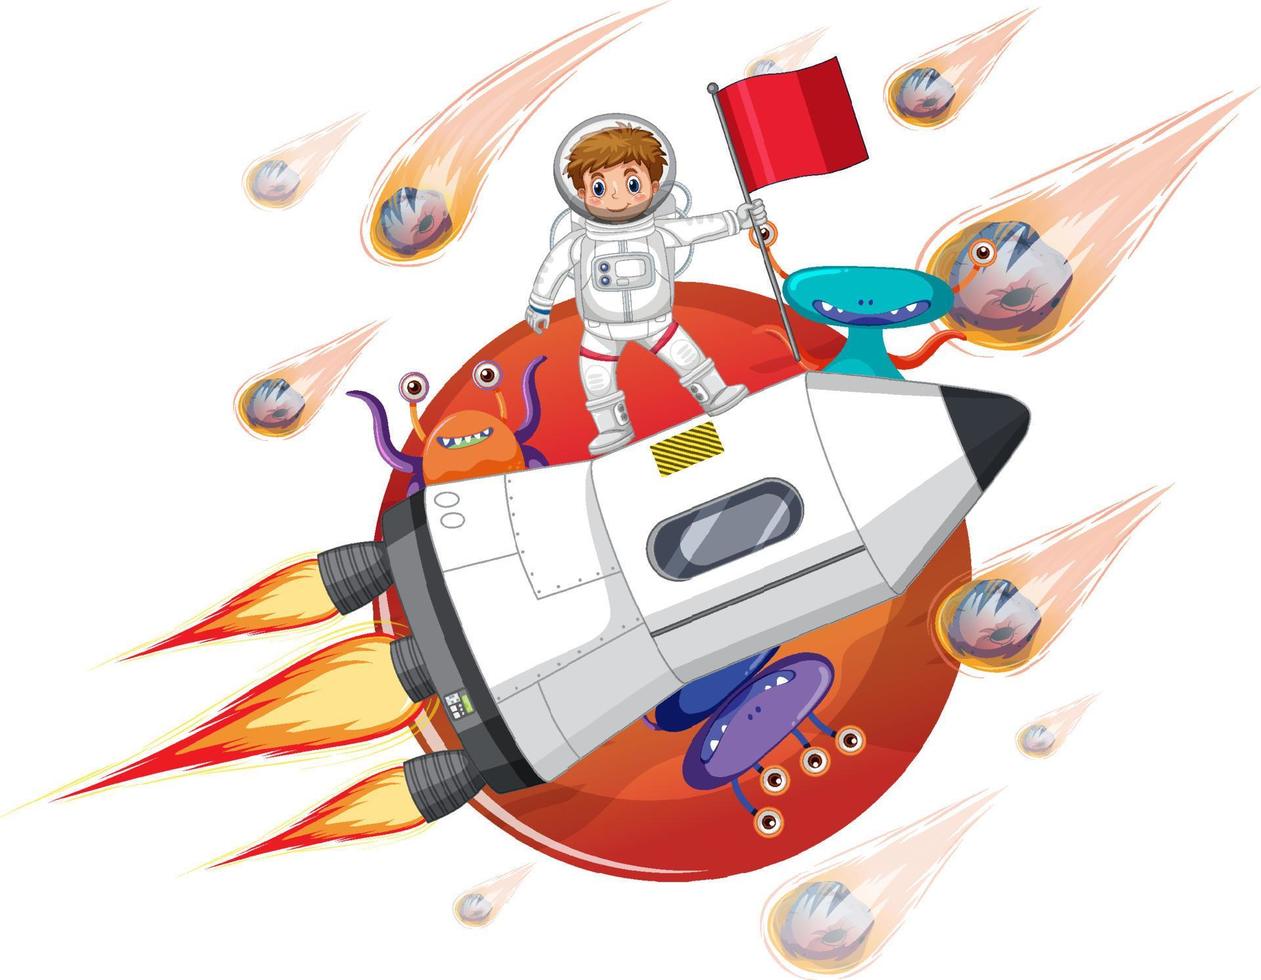 An astronaut on rocketship with aliens in cartoon style vector